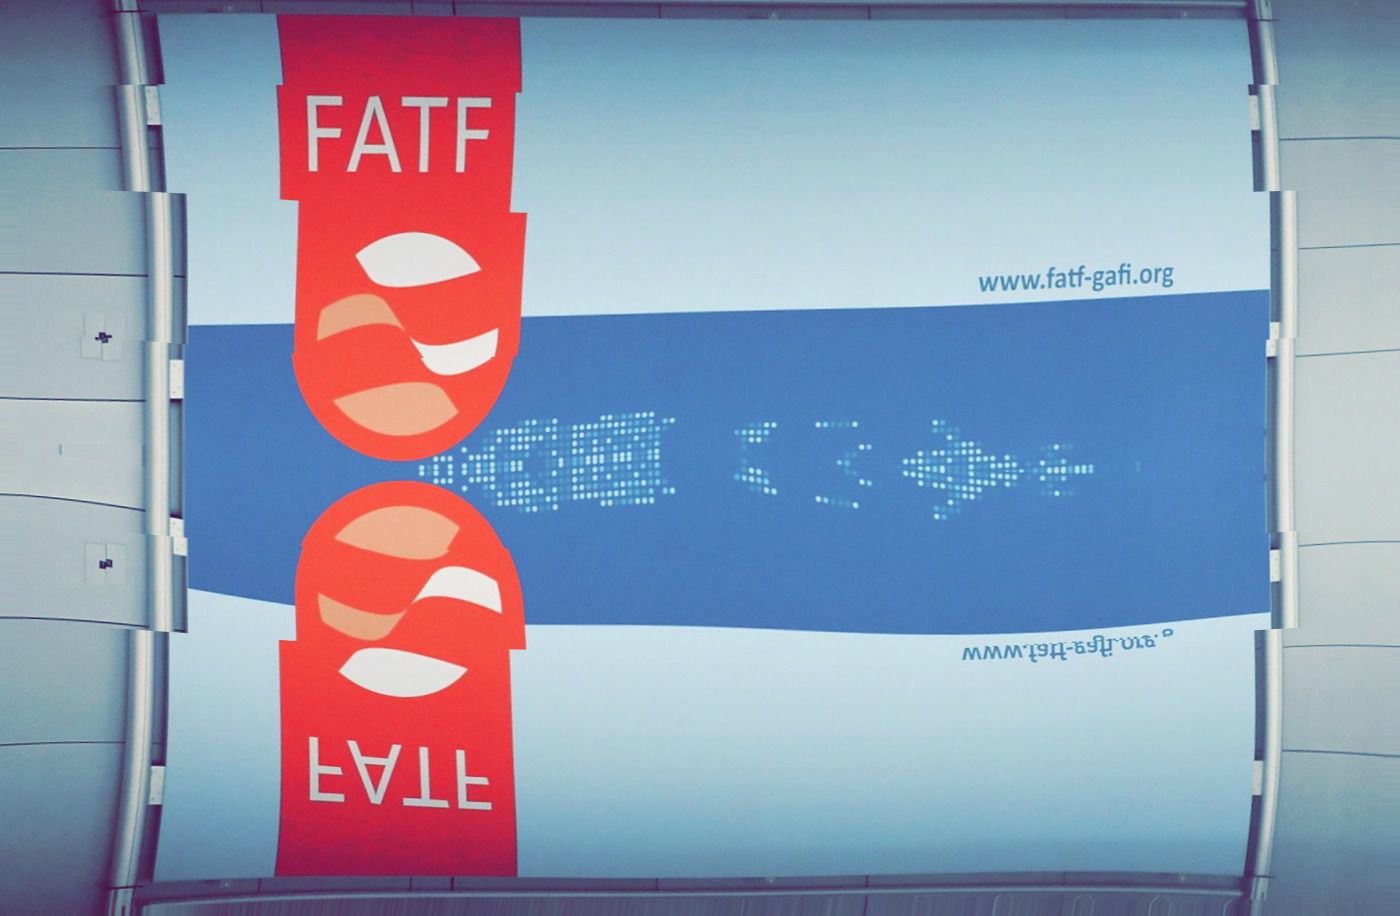 Fatf-crypto-guidance-looks-to-bring-industry-in-line-with-banks